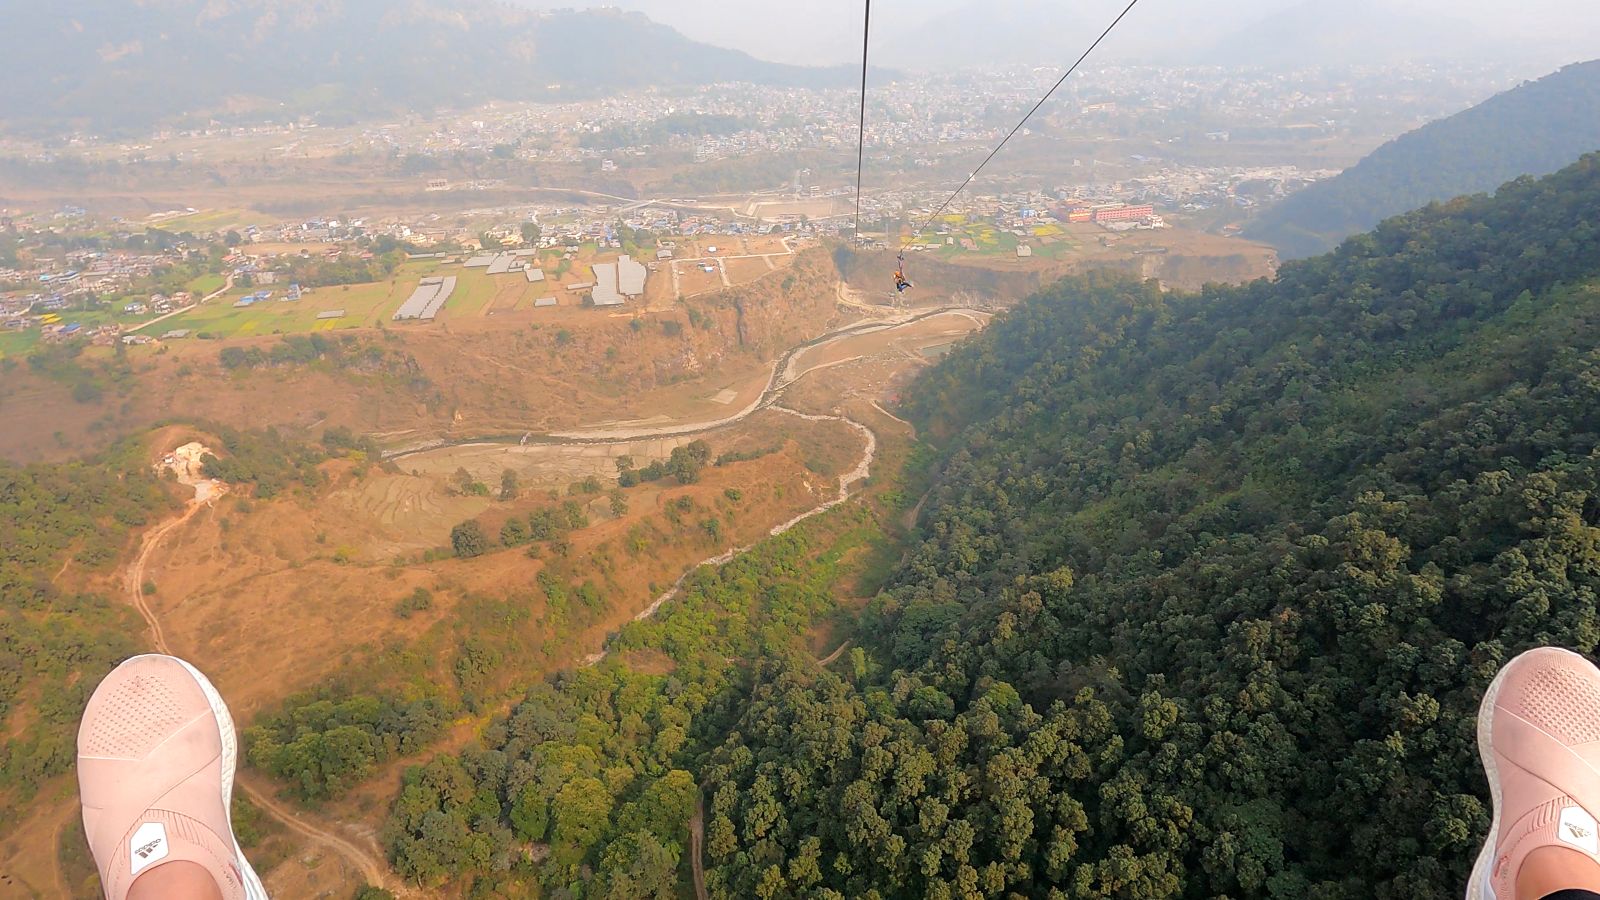 Ziplining over the valley in Pokhara